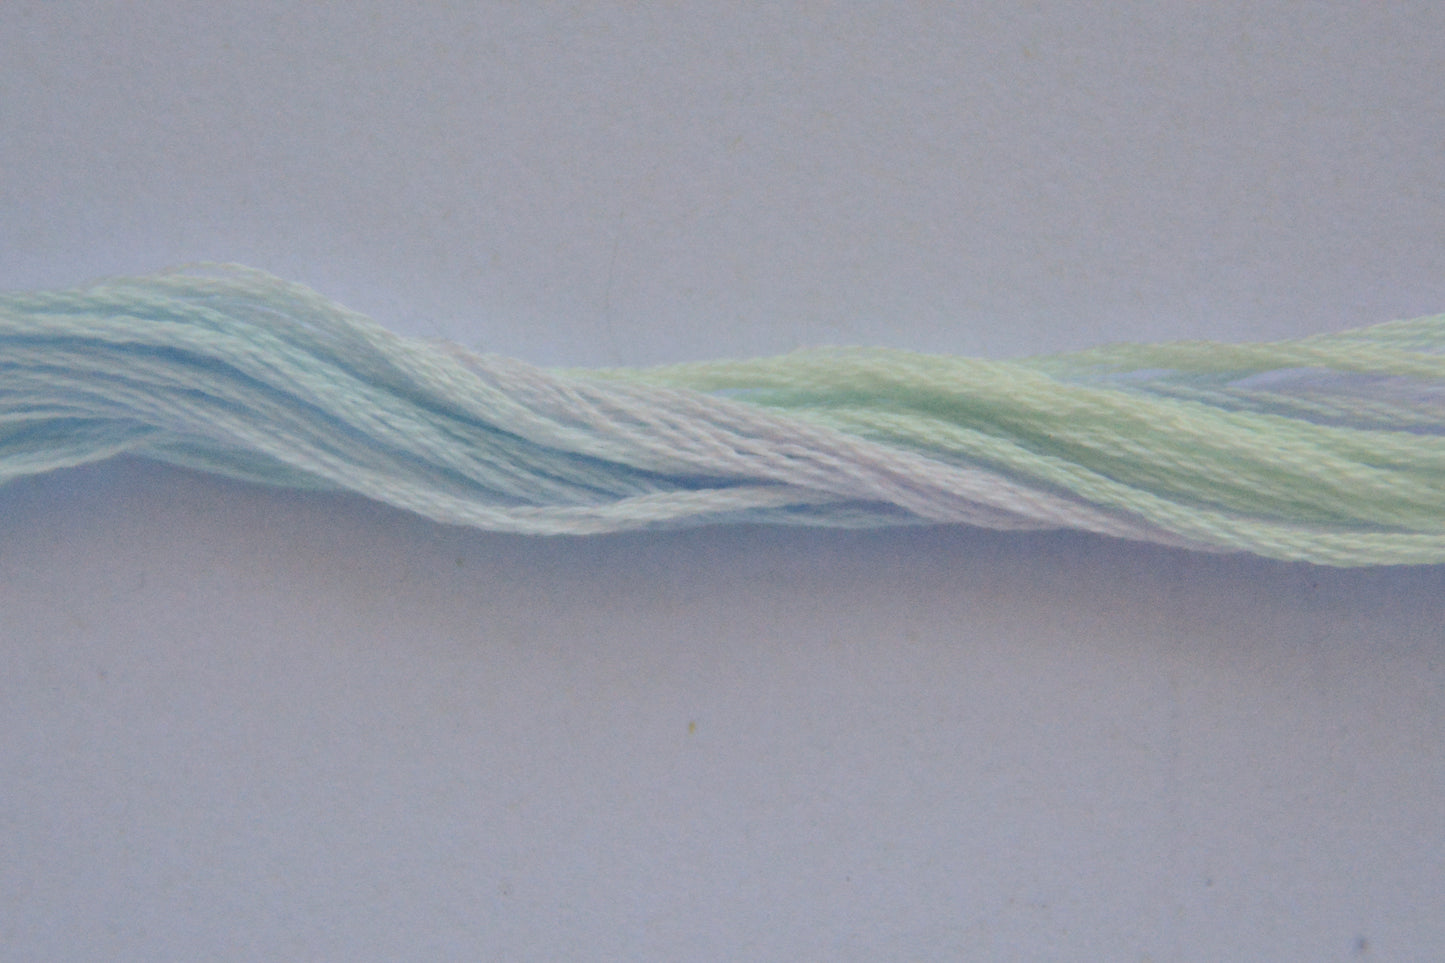 Snips & Snails Classic Colorworks 6-Strand Hand-Dyed Embroidery Floss